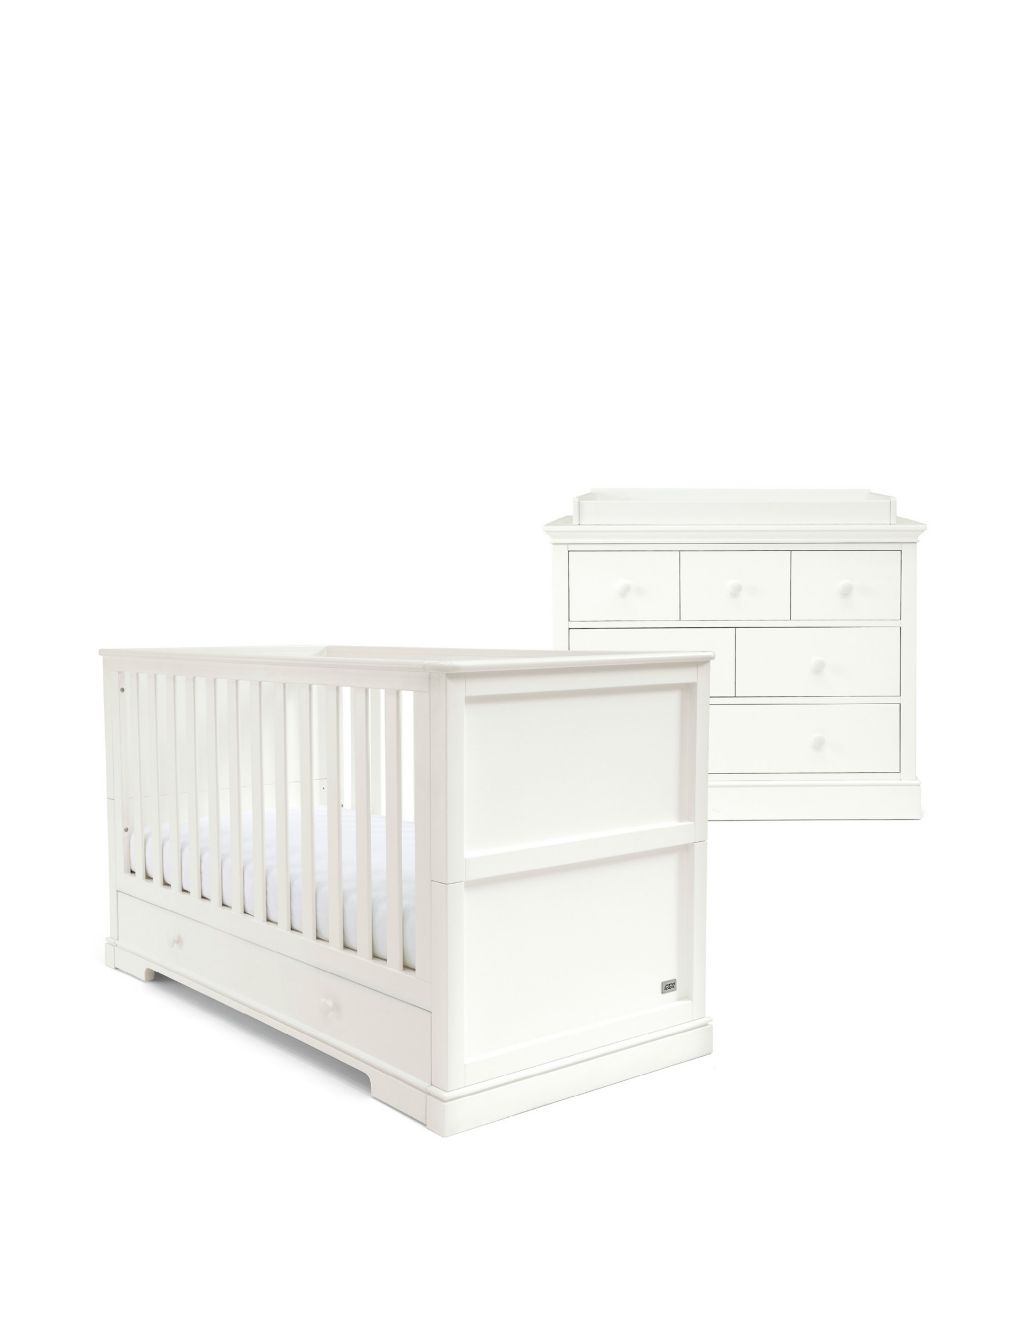 Oxford 2 Piece Cotbed Set with Dresser image 1